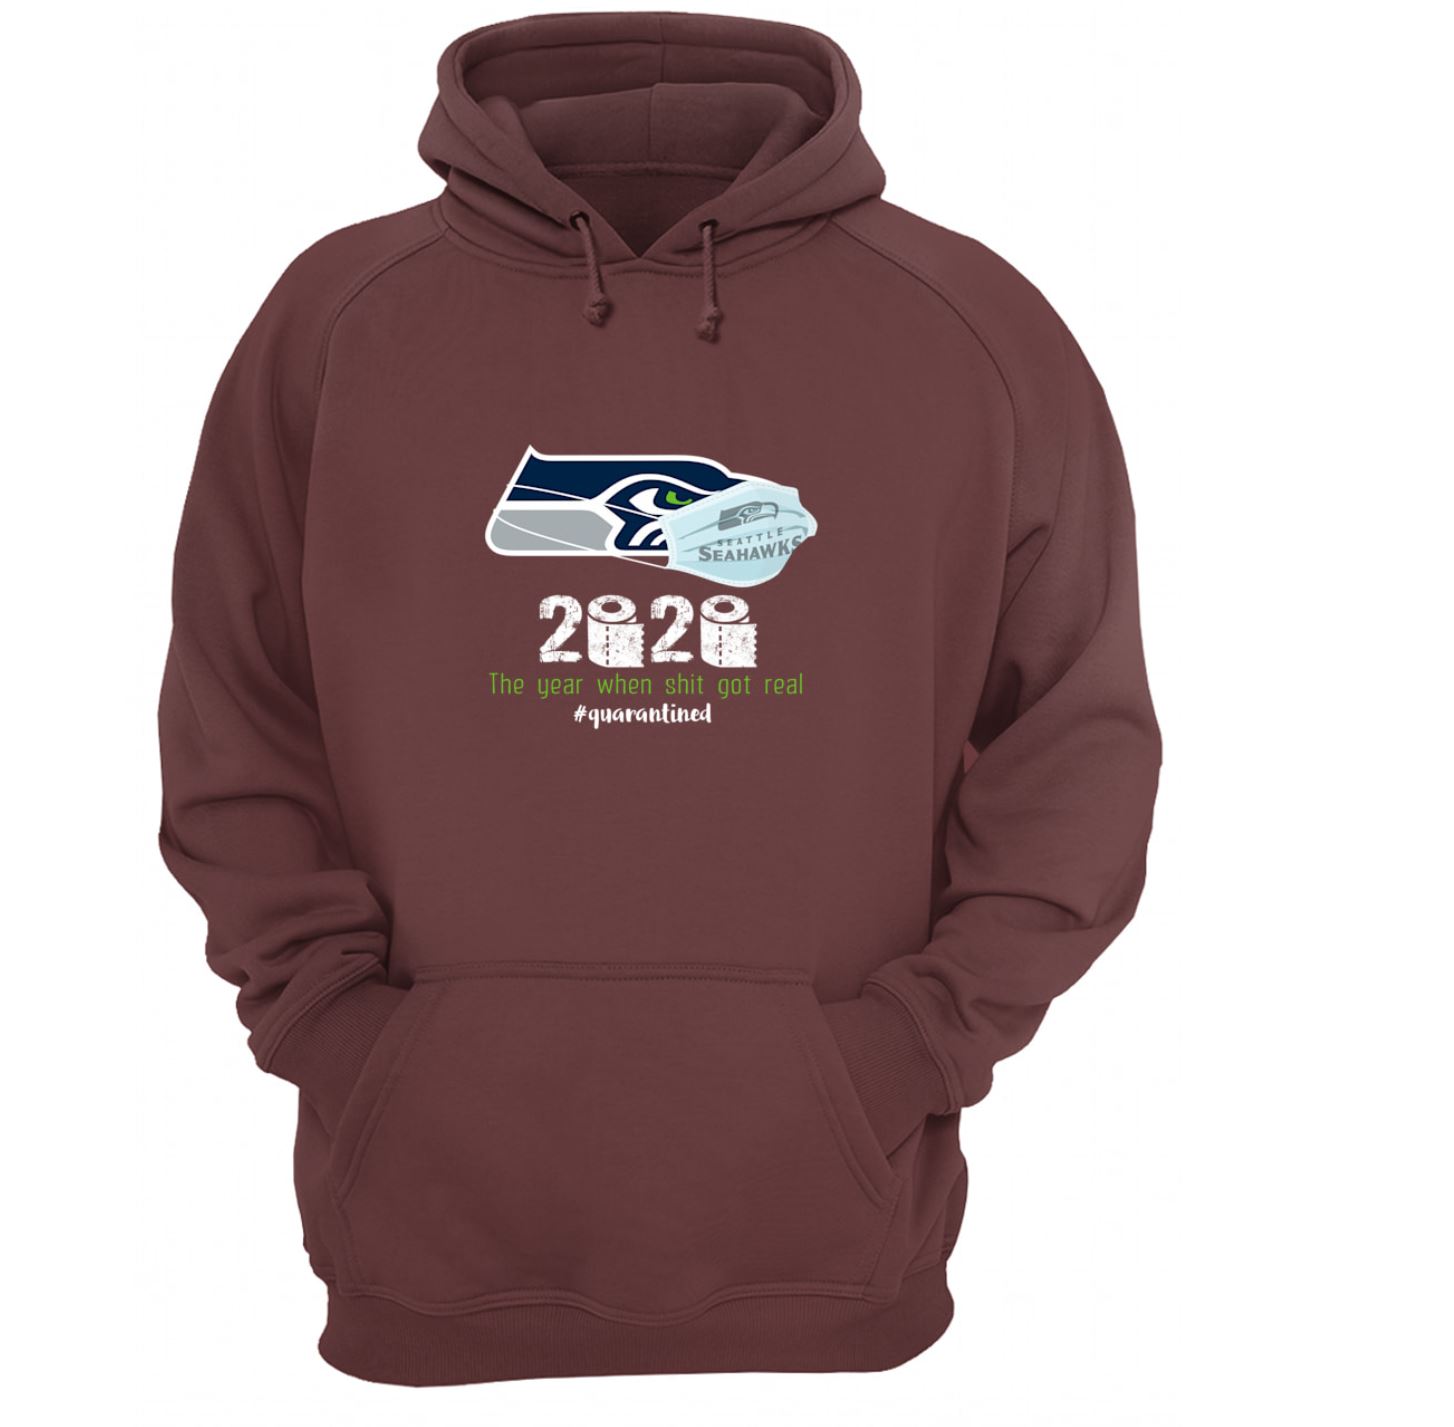 Seattle Seahawks 2020 The Year When Shit Got Real Quarantined hoodie